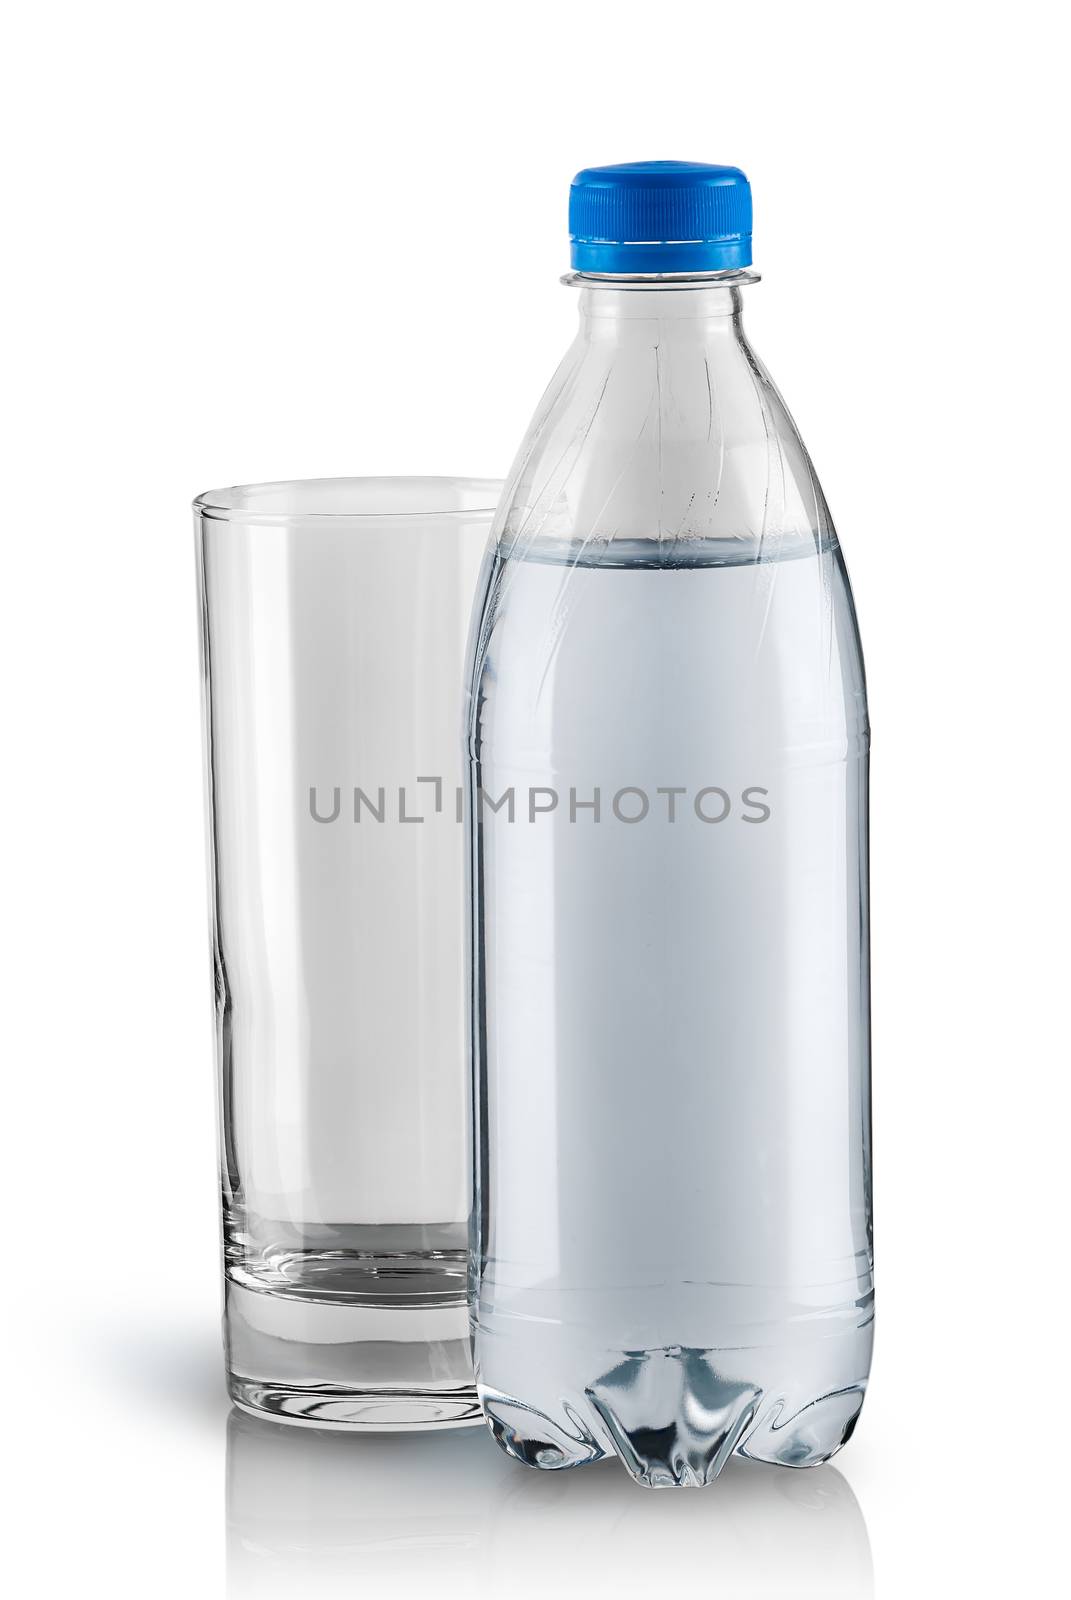 Empty glass and plastic bottle. Closed water bottle. Isolated on white background.